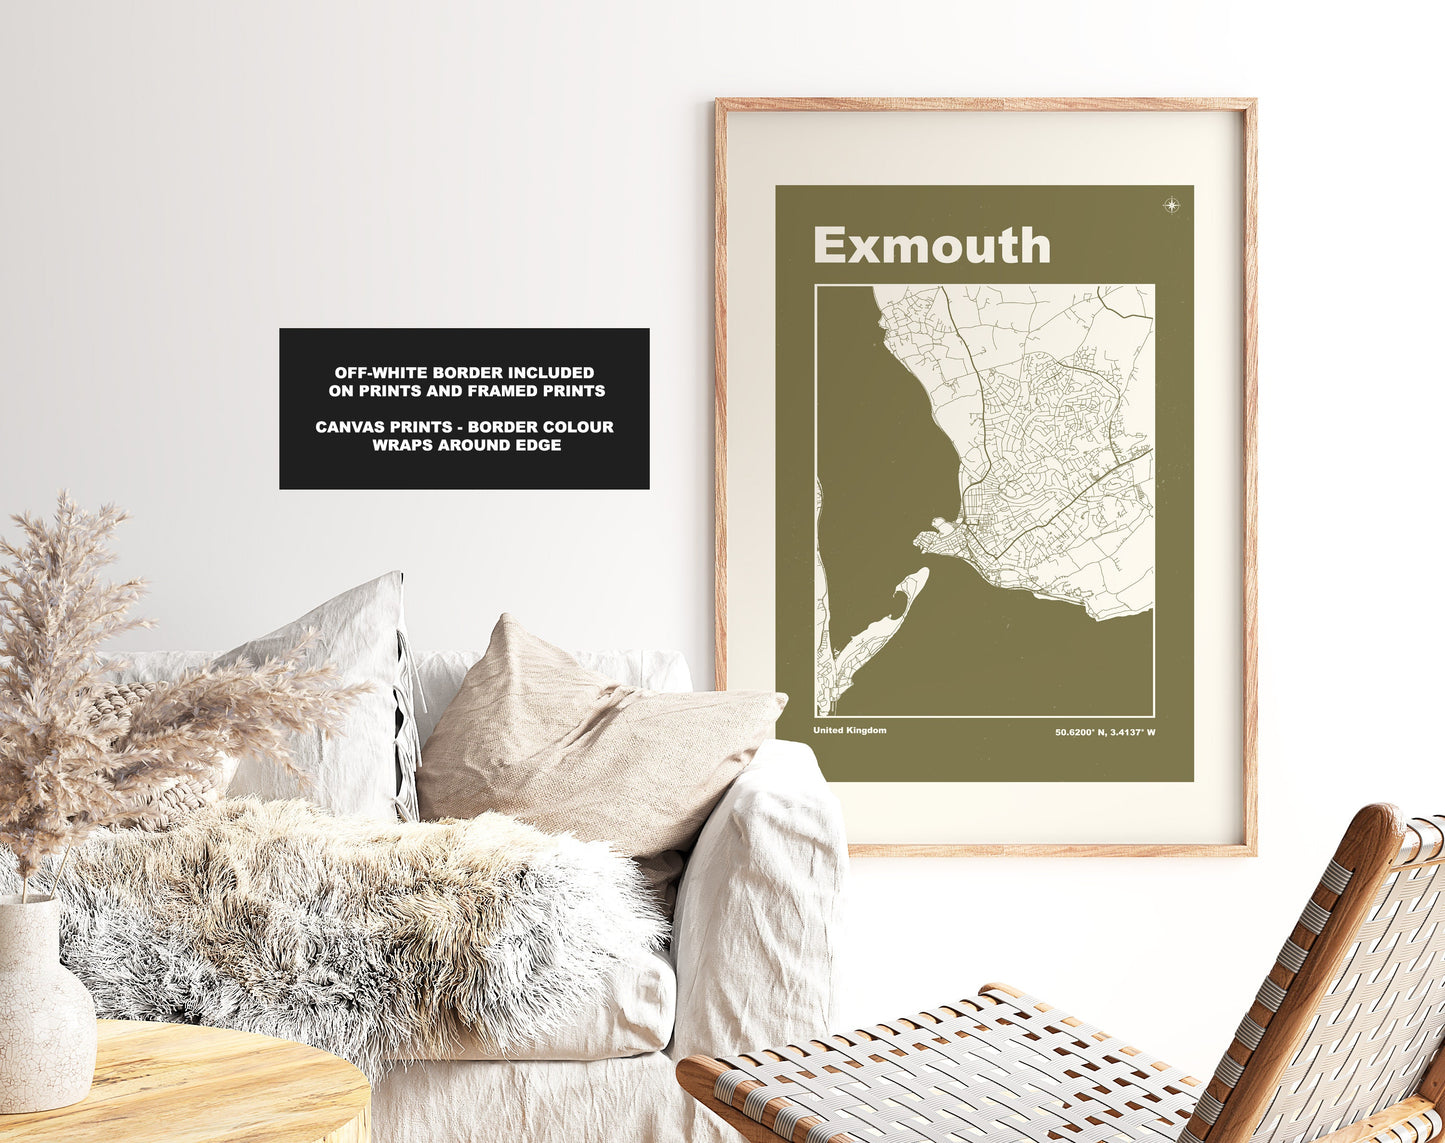 Exmouth Print - Map Print - Mid Century Modern  - Retro - Vintage - Contemporary - Exmouth Print - Map - Map Poster - Gift - Devon